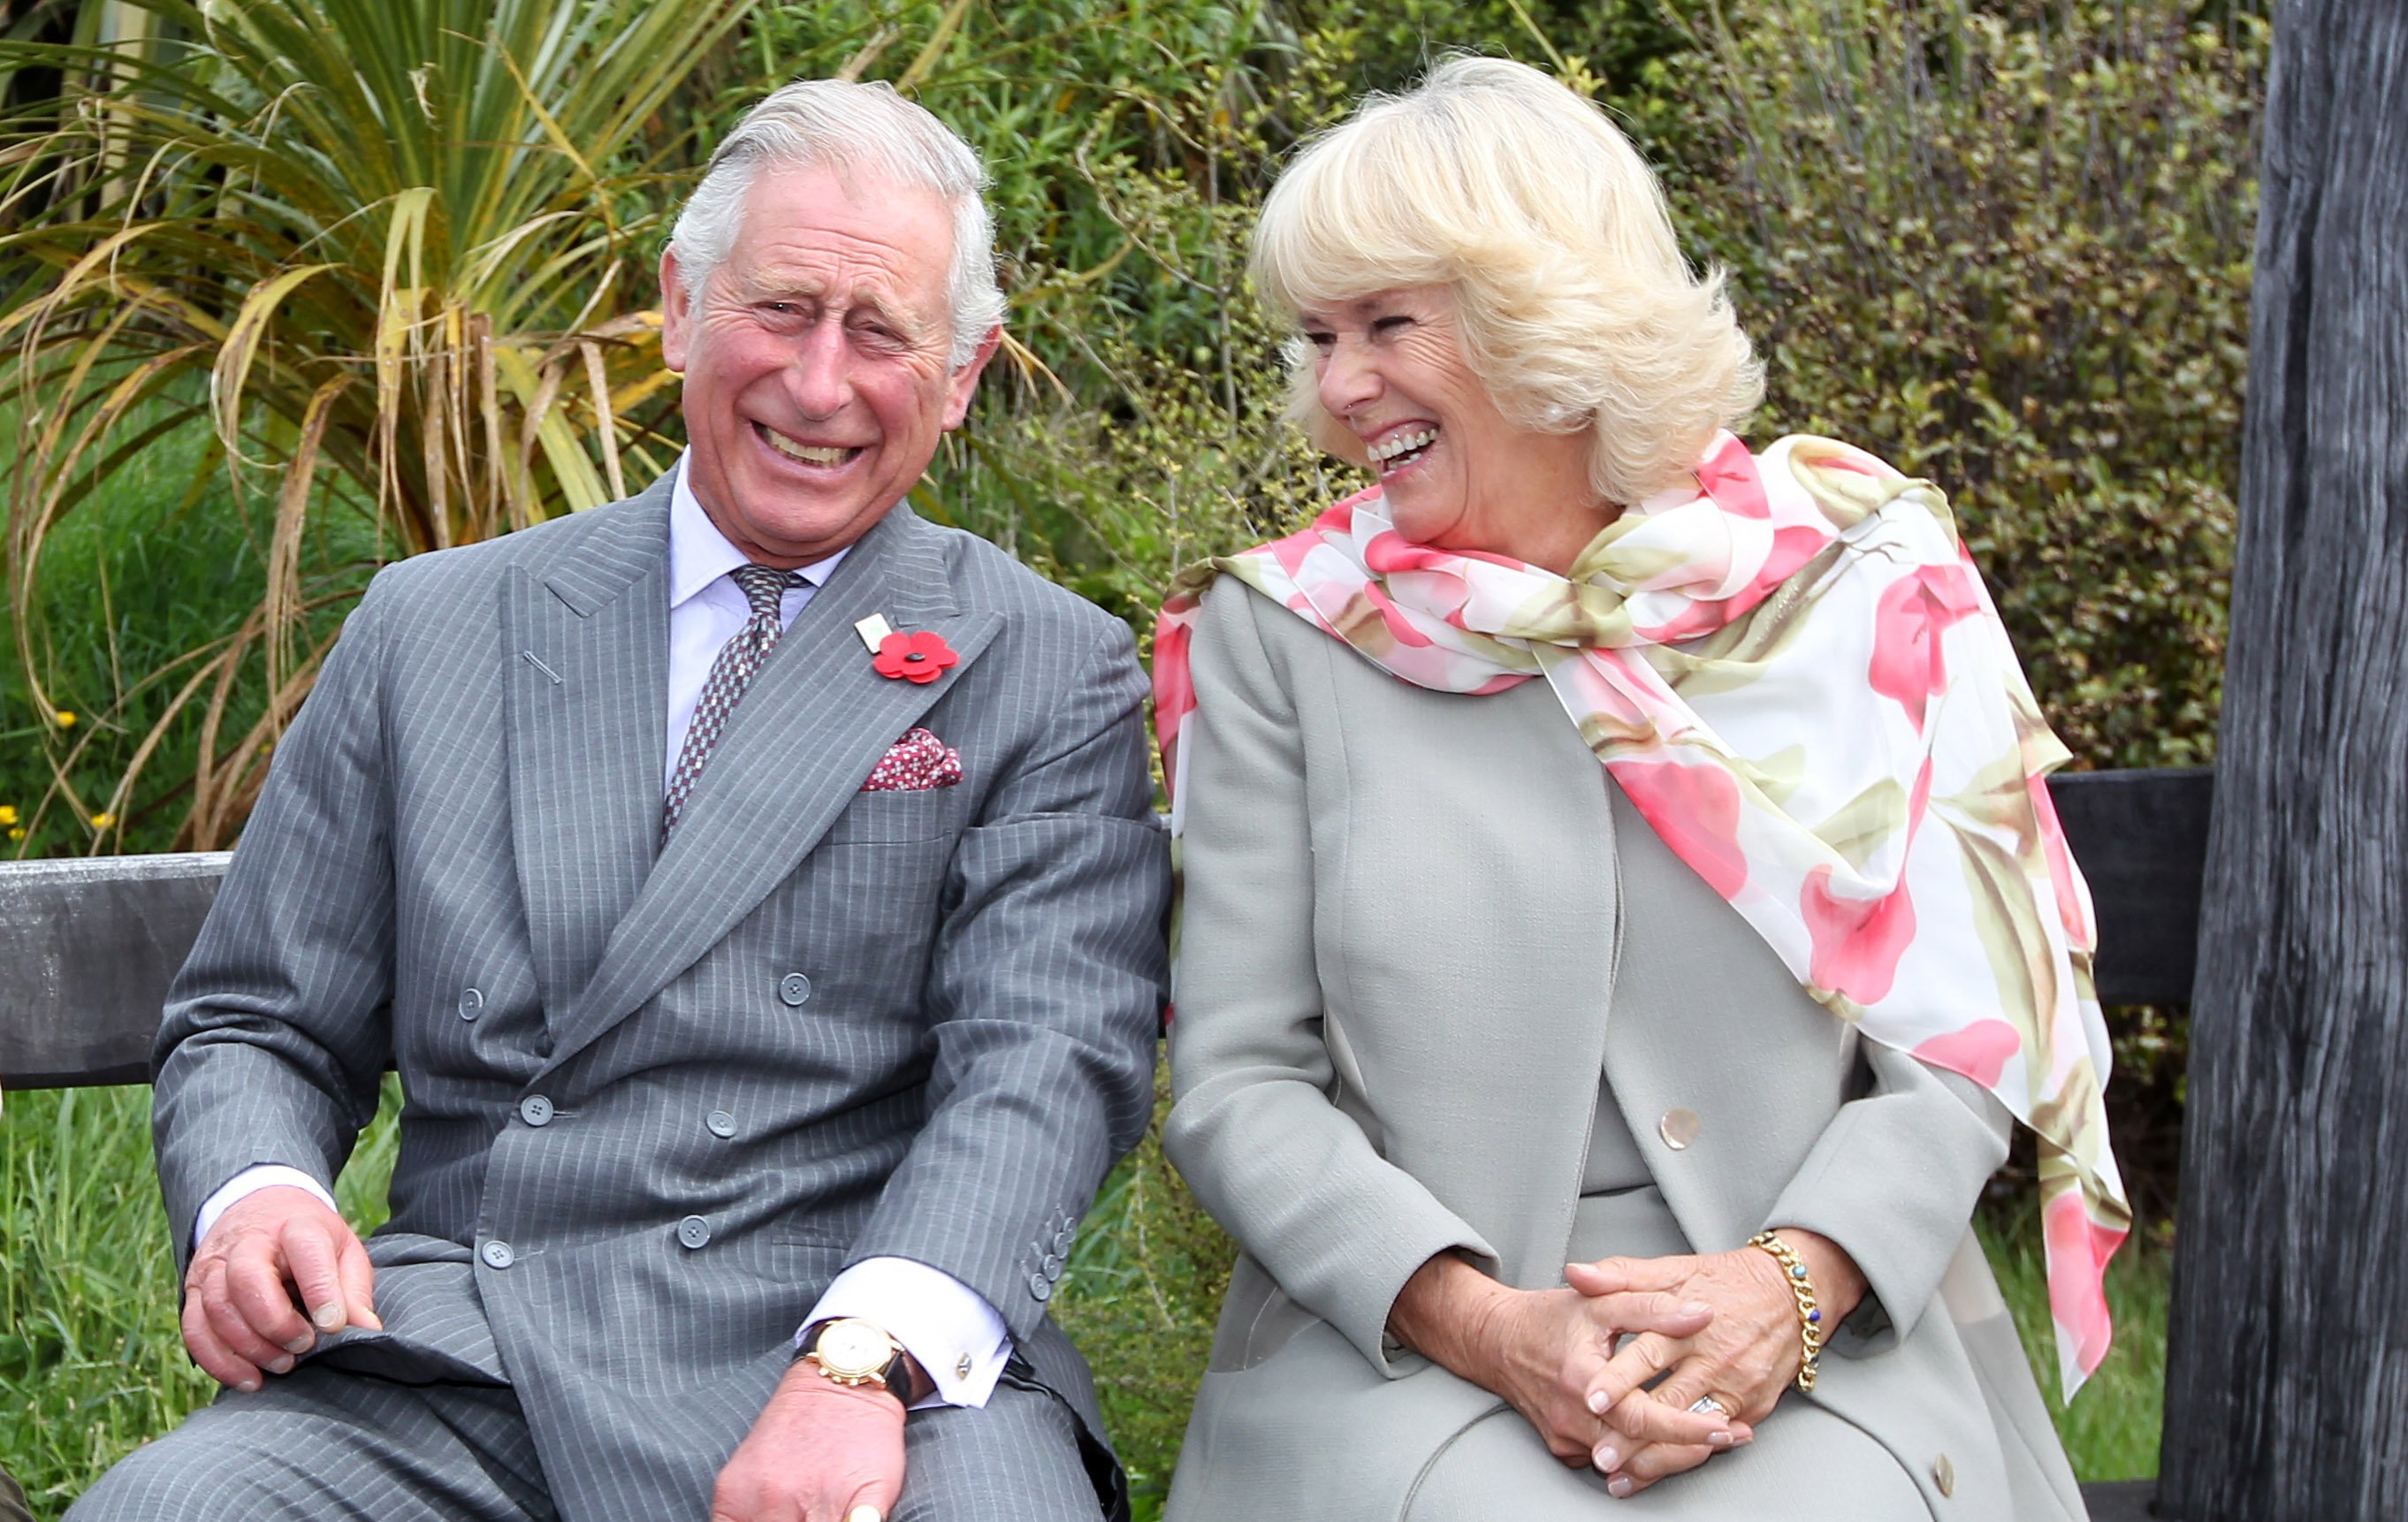 King Charles III and Queen Camilla sit side-by-side and smile.